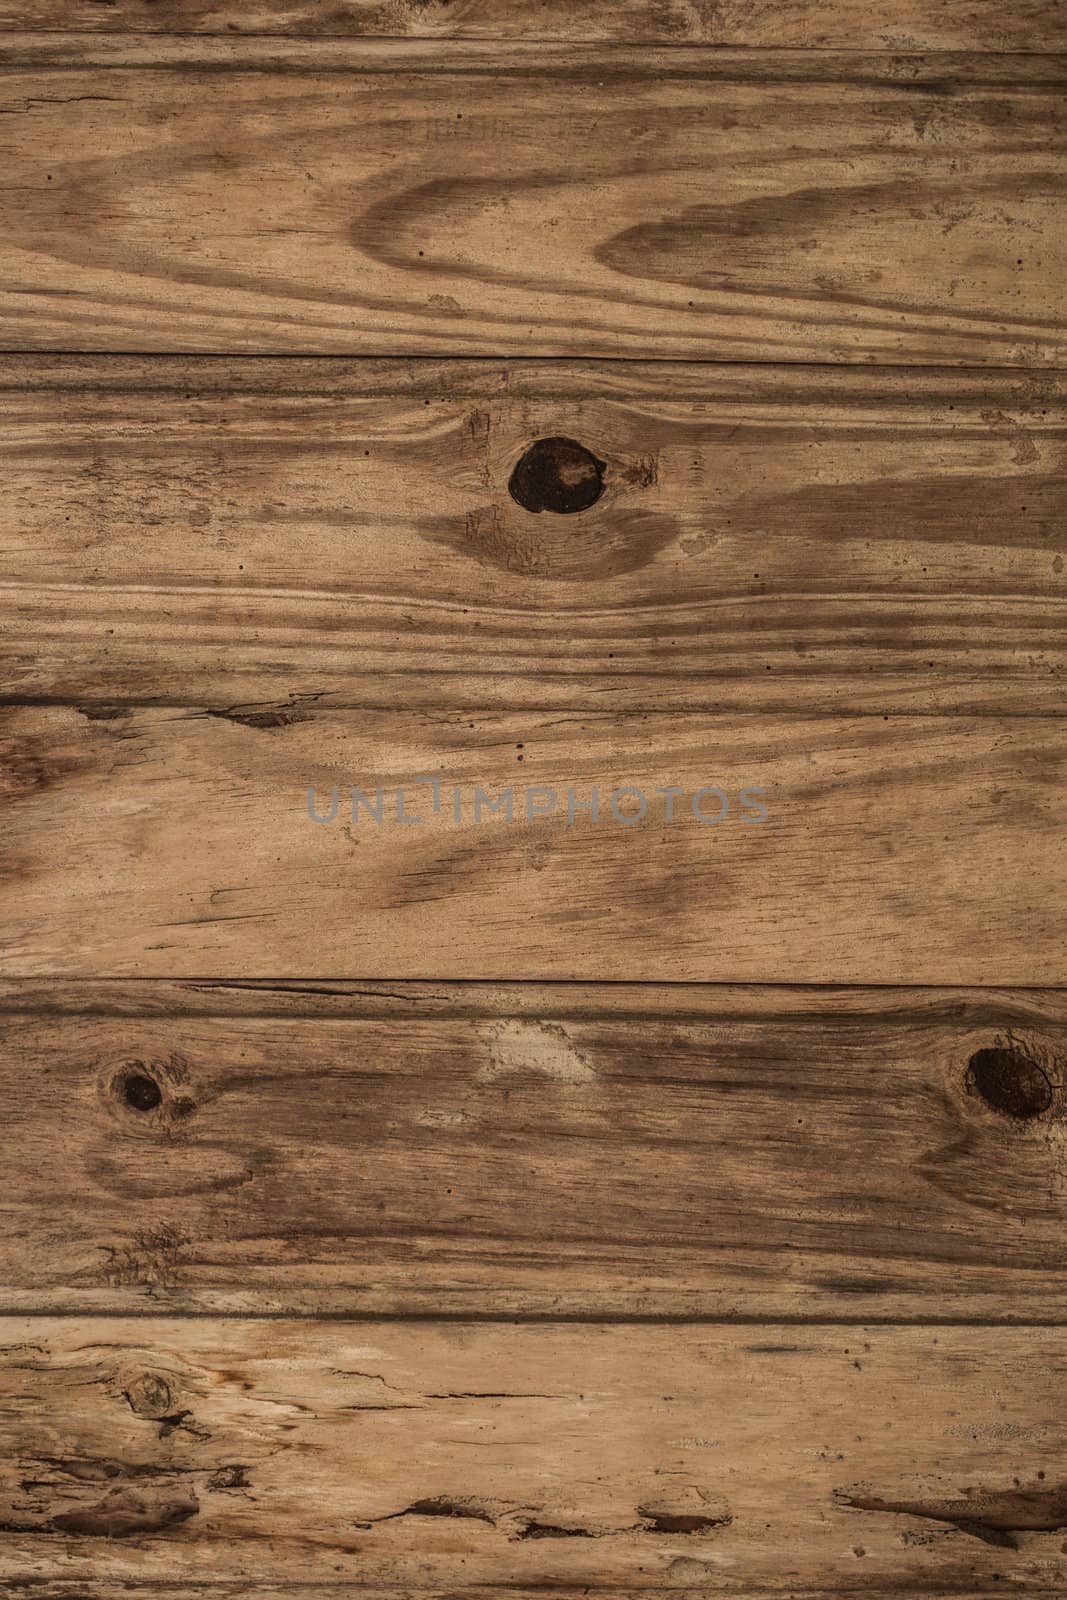 A close-up image of a wooden texture backgroud. Check out other textures in my portfolio.